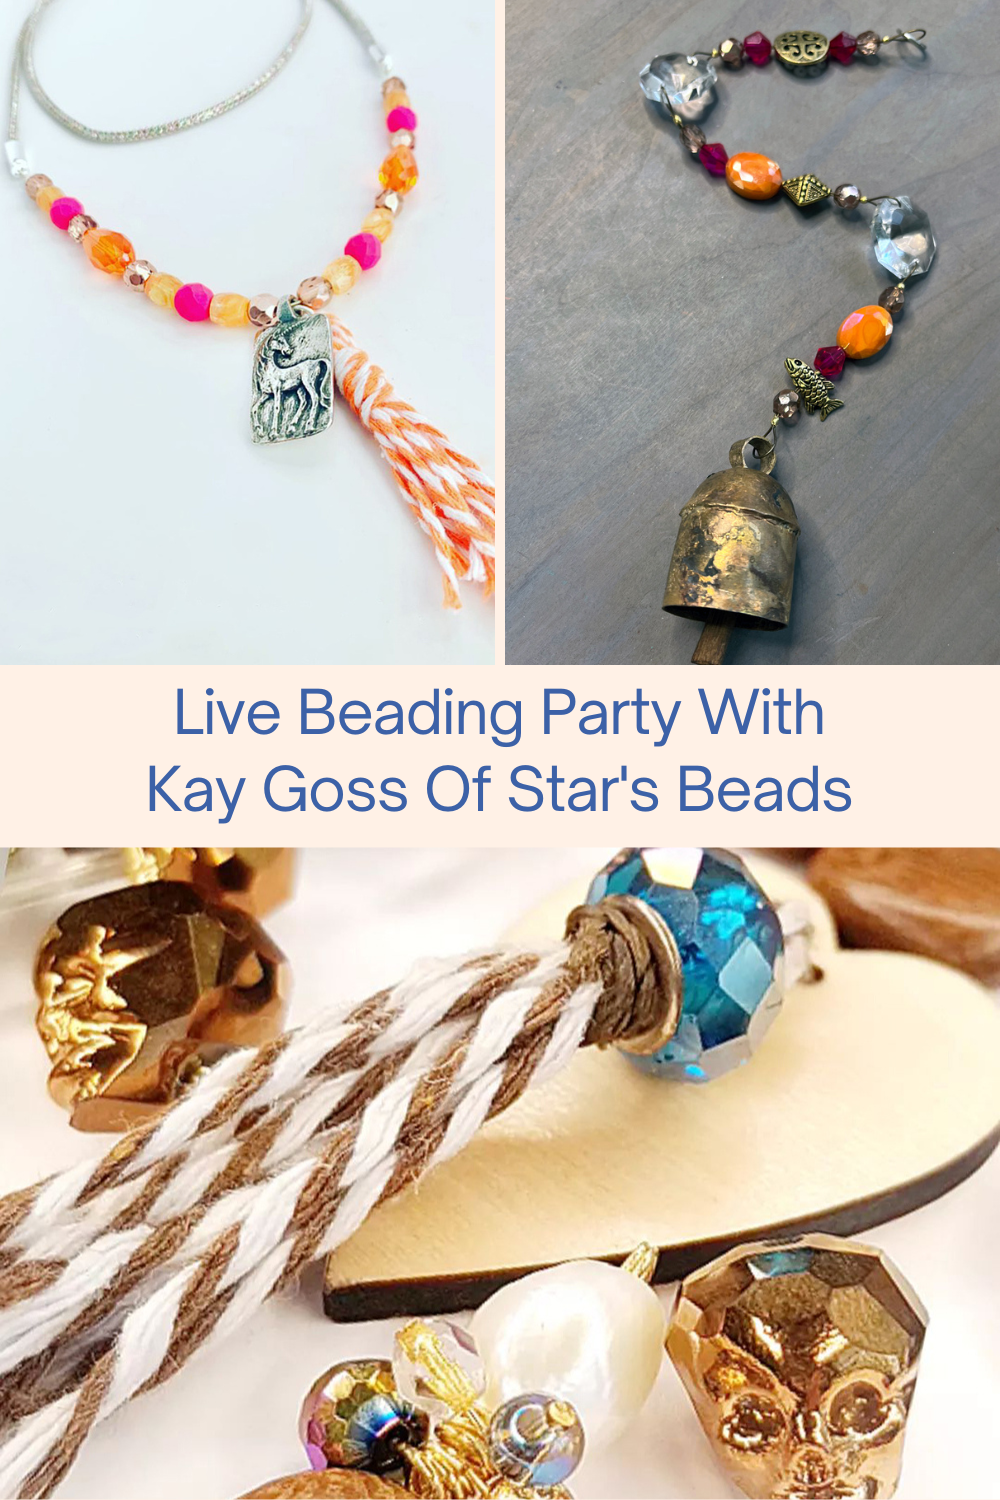 Live Beading Party With Kay Goss Of Star's Beads Collage